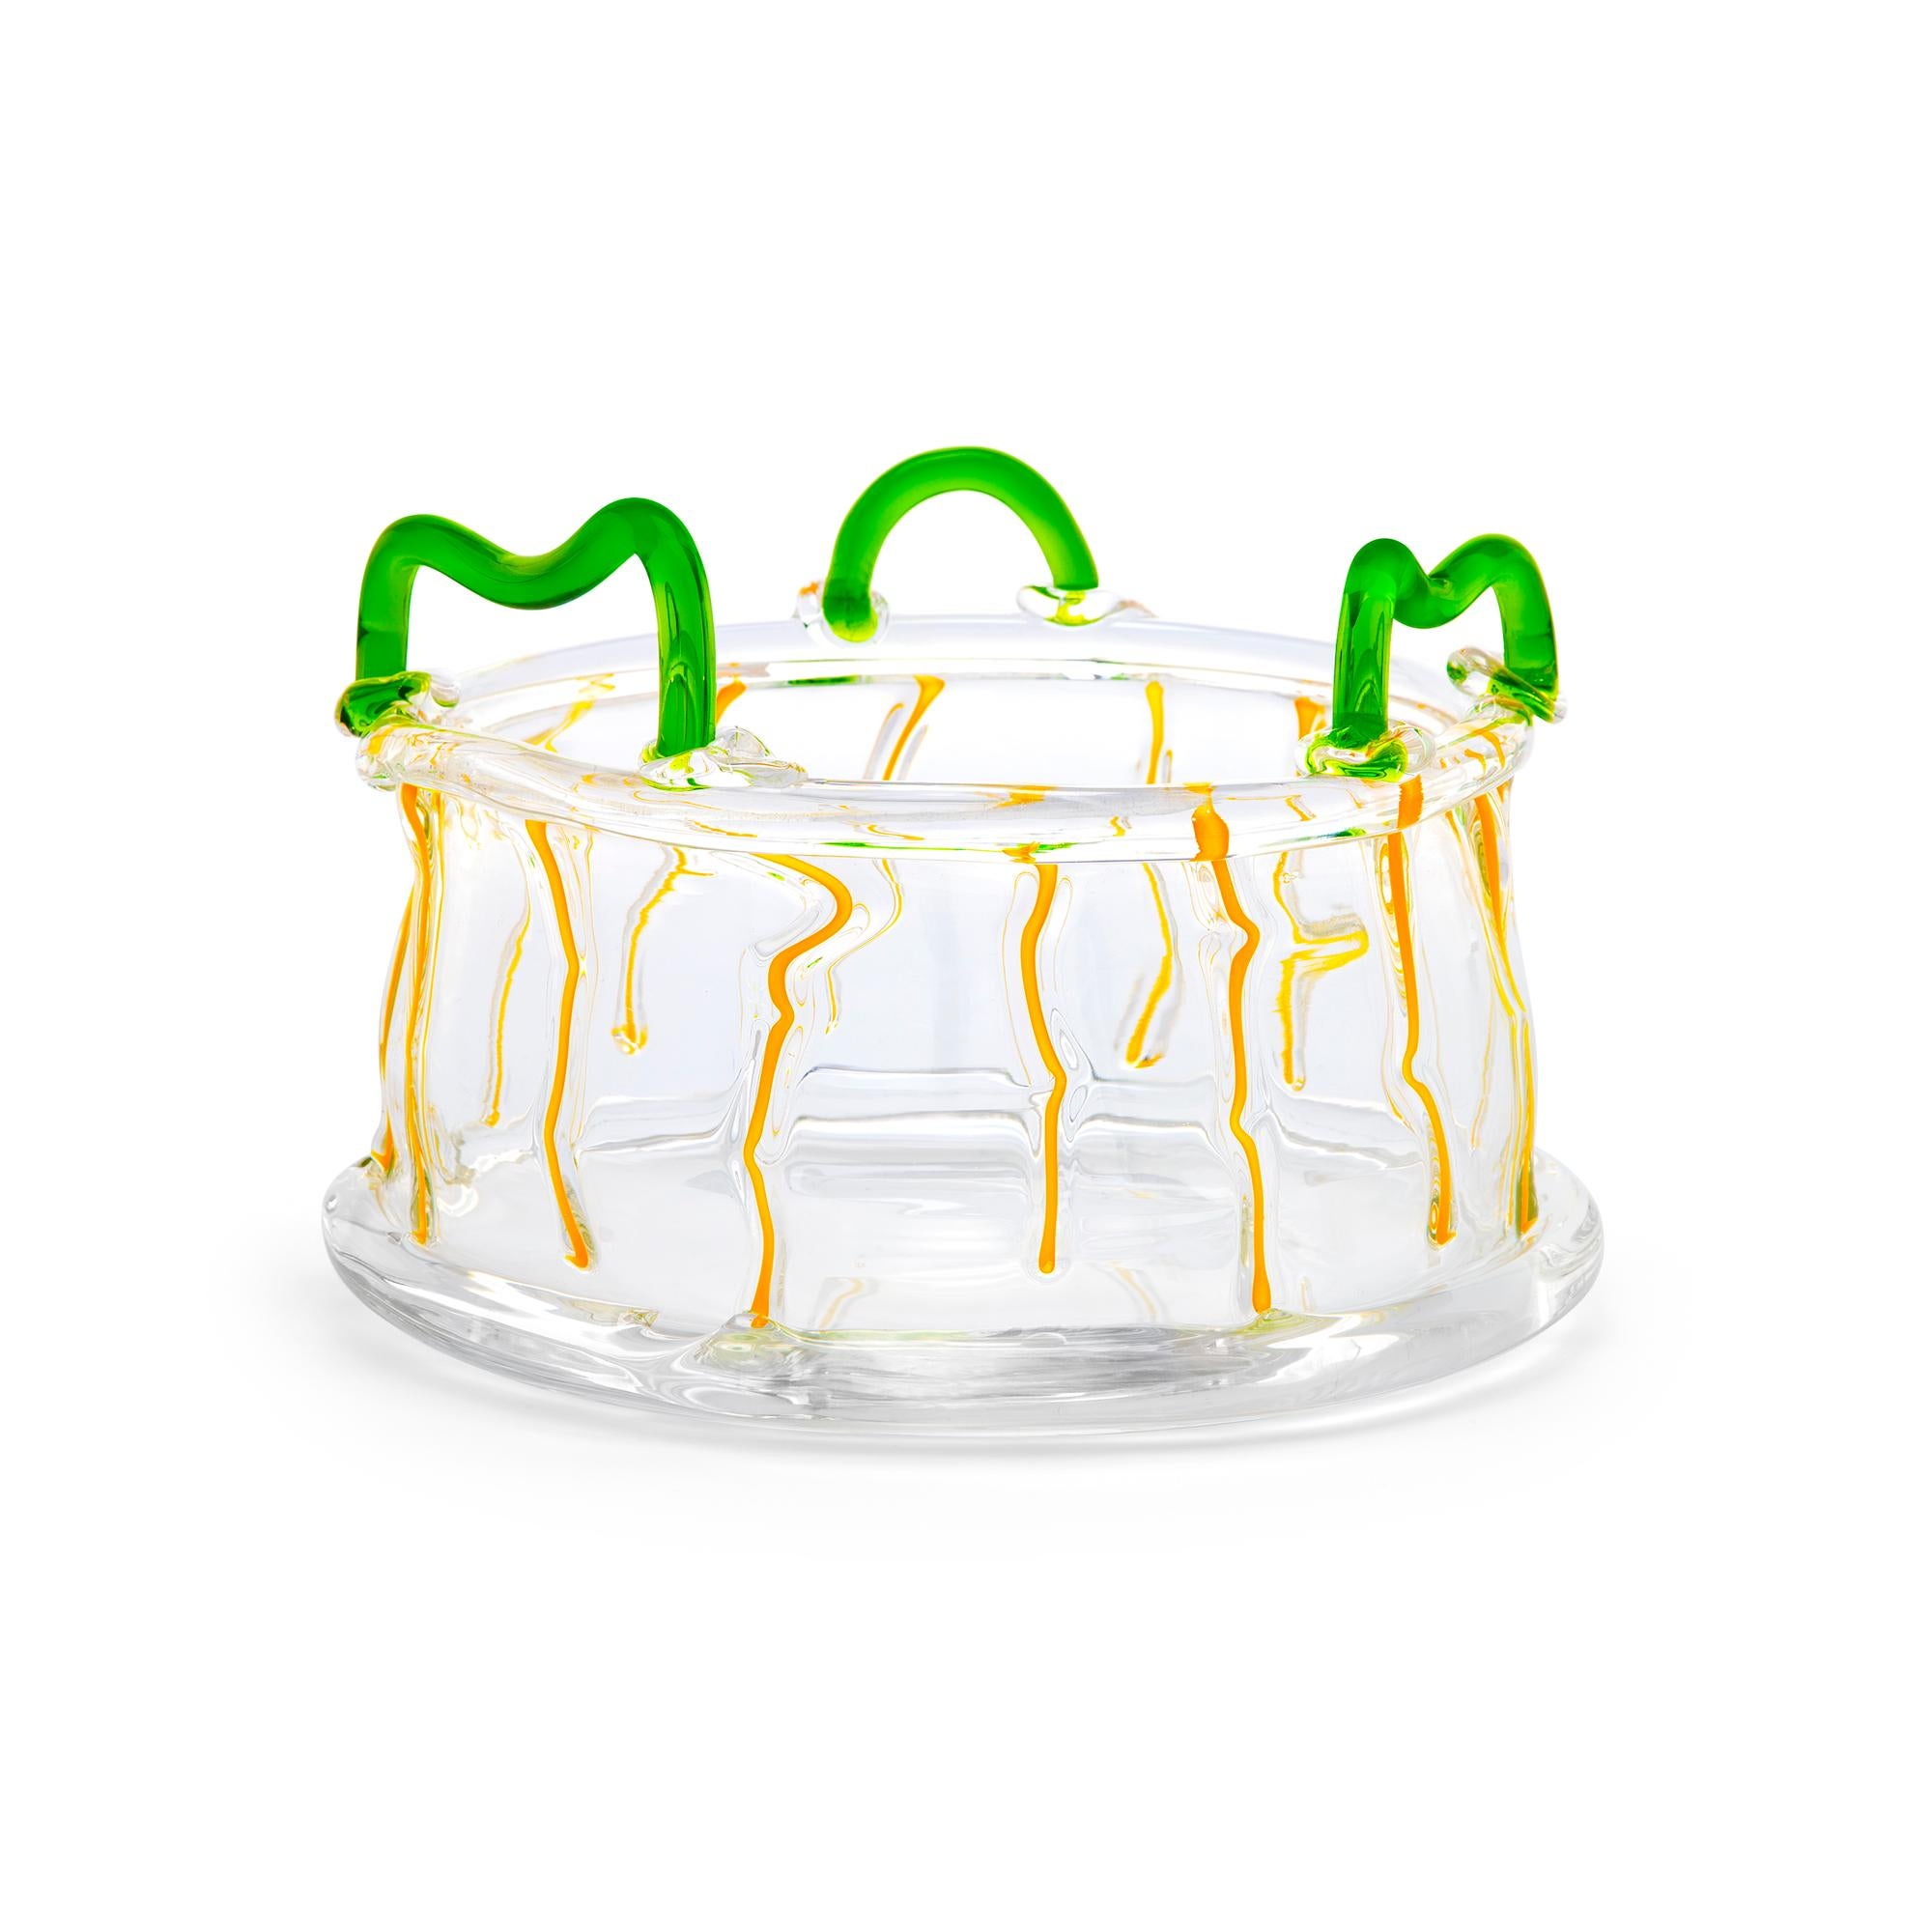 Aldebaran Glass Fruit Bowl, by Ettore Sottsass for Memphis Milano Collection For Sale